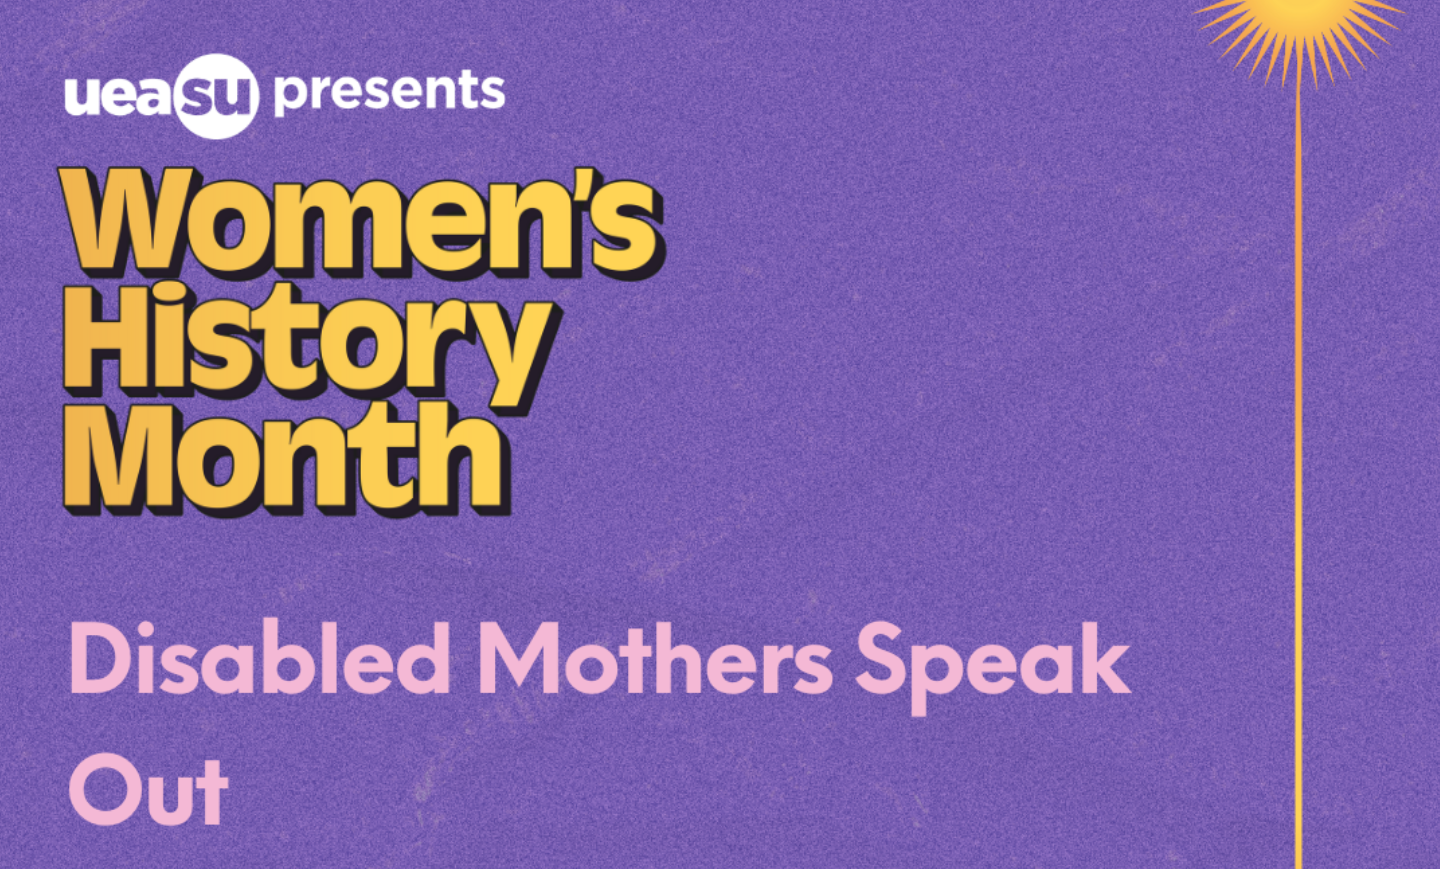 University of East Anglia Students Union presents Women's History Month -- Disabled Mothers Speak Out.  Gold letters on a violet background, with a sun design in the  top right corner.  The event title is in light pink on the background colour.